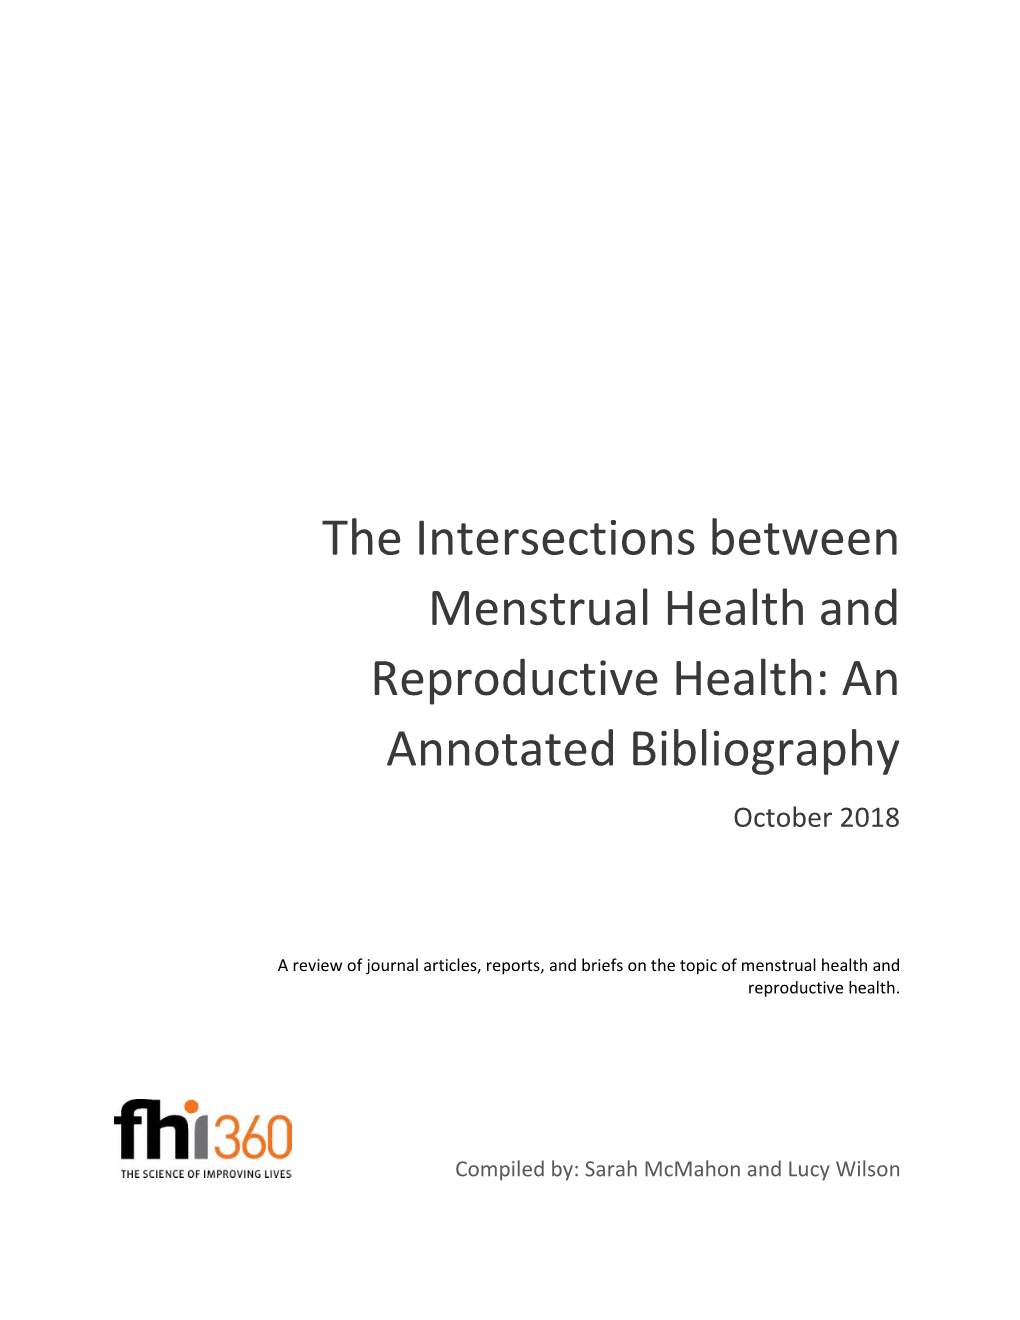 The Intersections Between Menstrual Health and Reproductive Health: an Annotated Bibliography October 2018